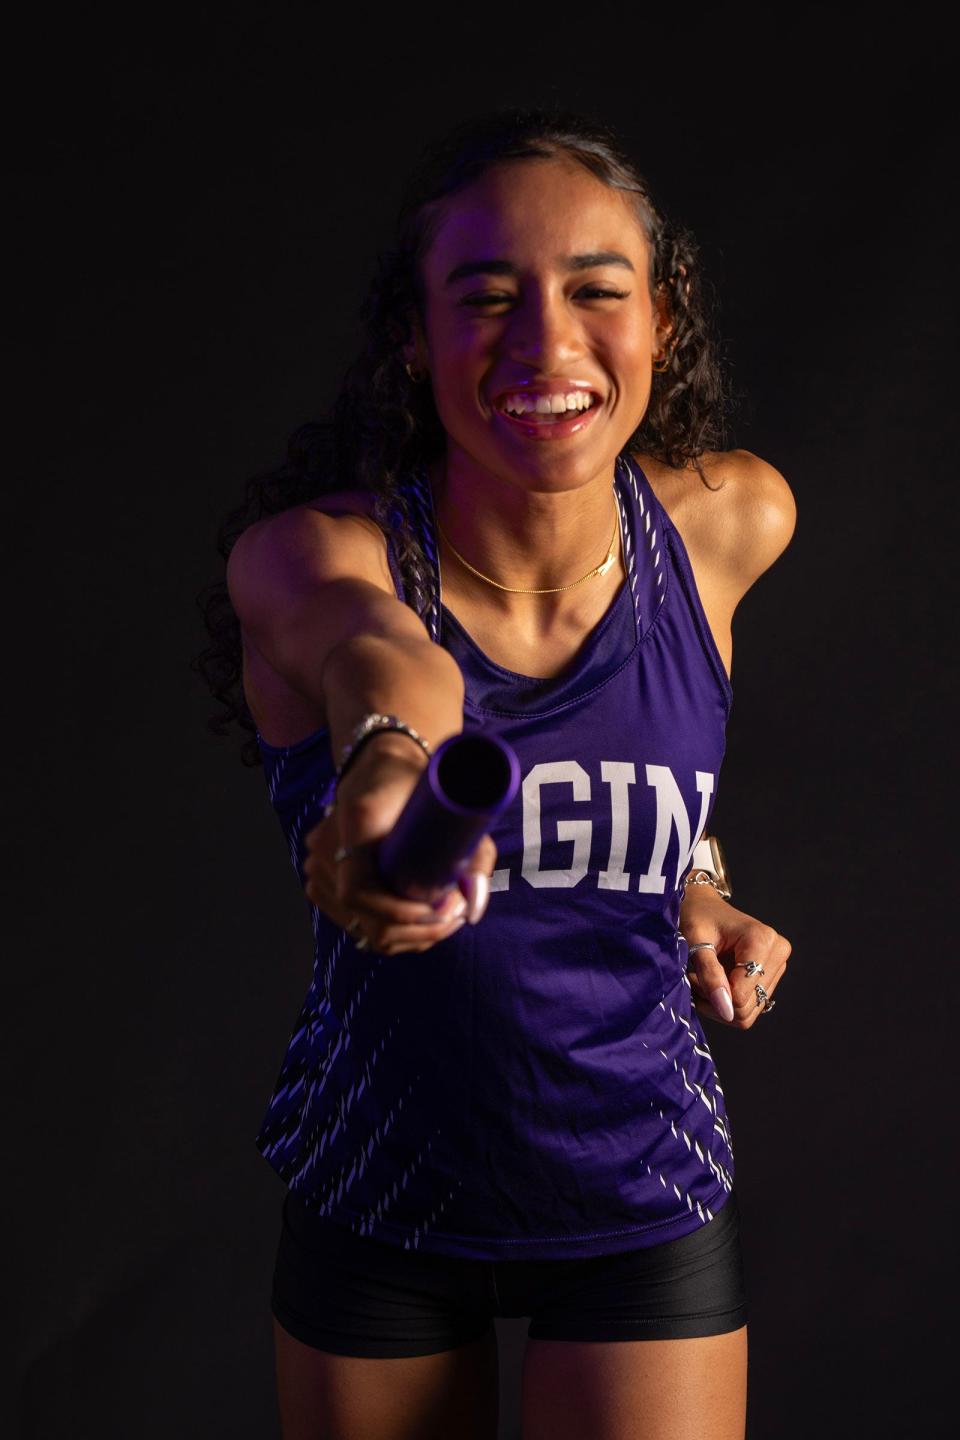 Elgin junior Kailyn Cook stays busy in the spring, competing in both soccer and track and field. She thinks soccer, with all its running up and down the field, helps get her ready for track.